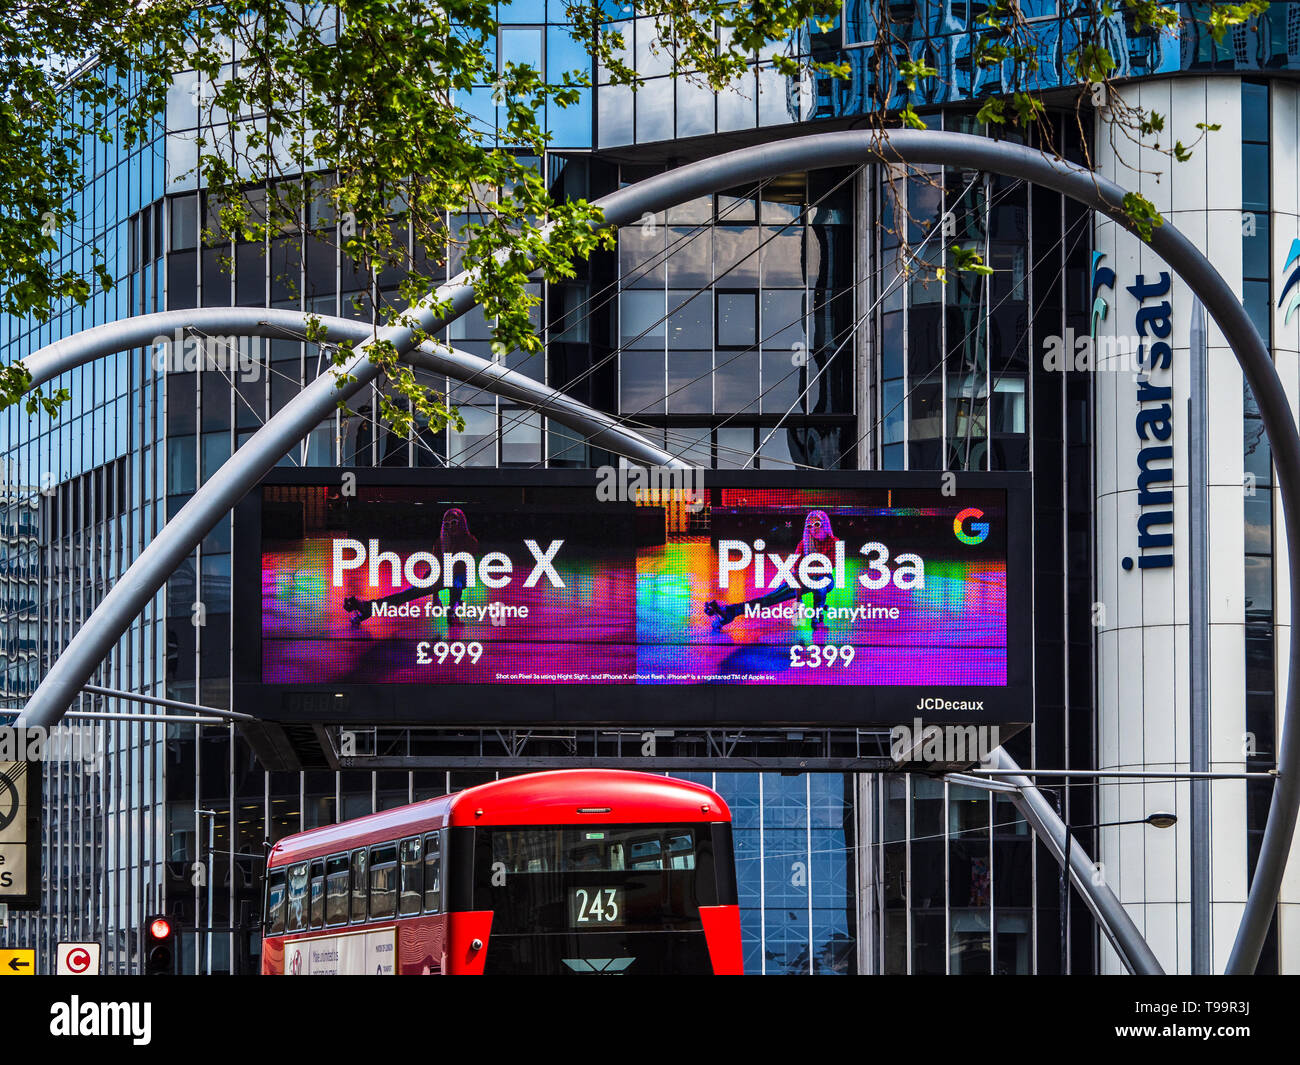 Silicon Roundabout or Old Street Roundabout including the Inmarsat Headquarters. The heart of London's tech hub & fintech area in east London. Stock Photo